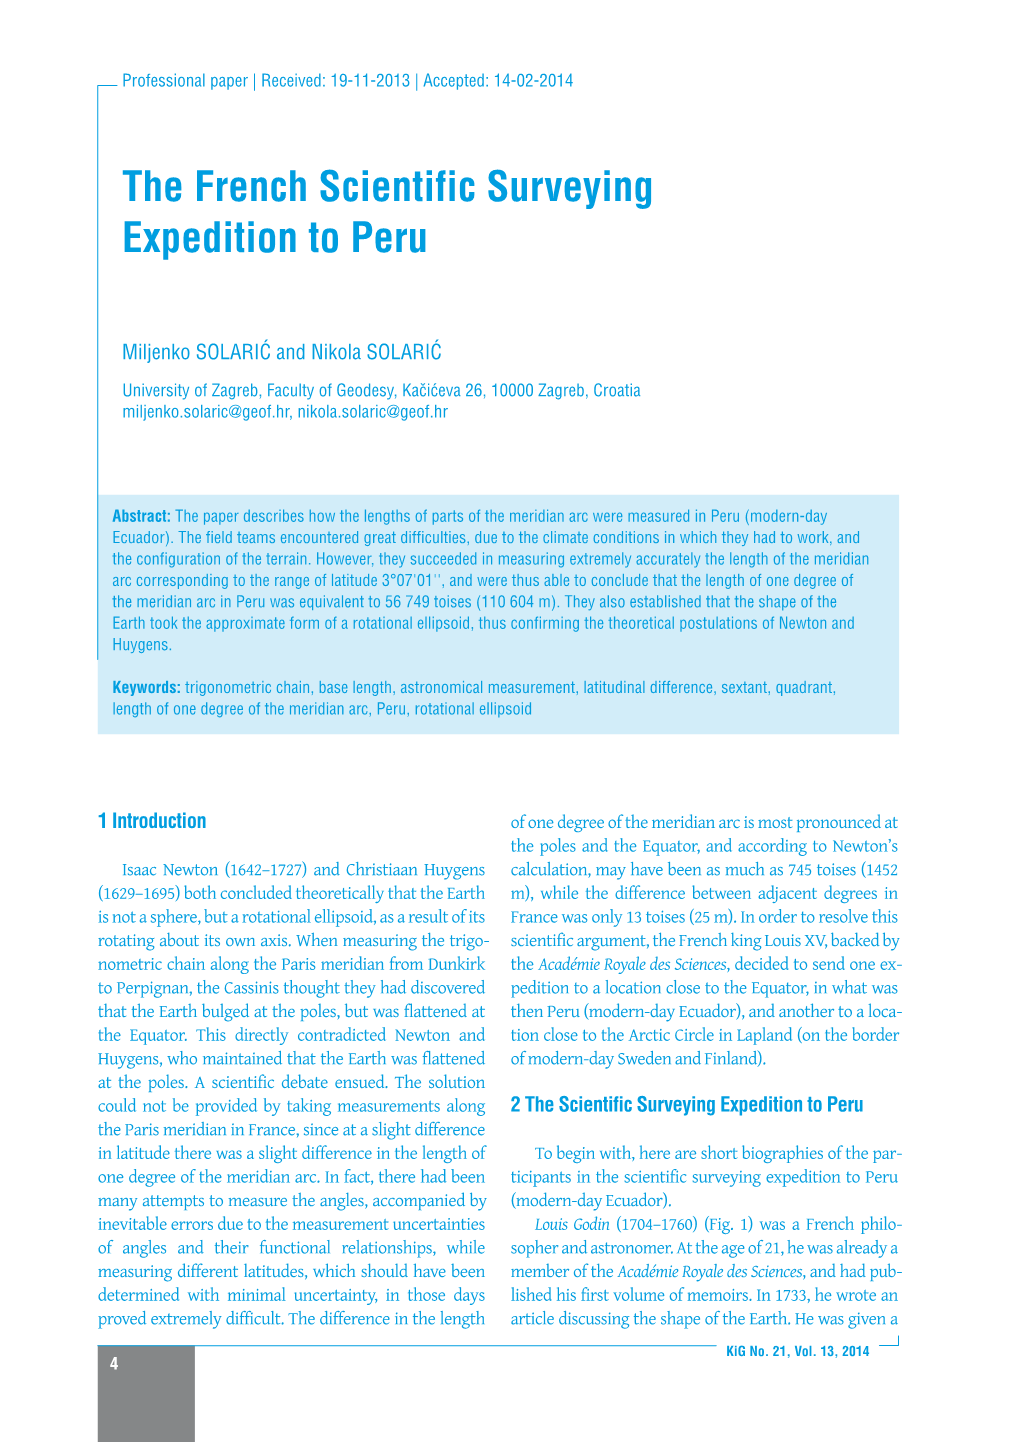 The French Scientific Surveying Expedition to Peru